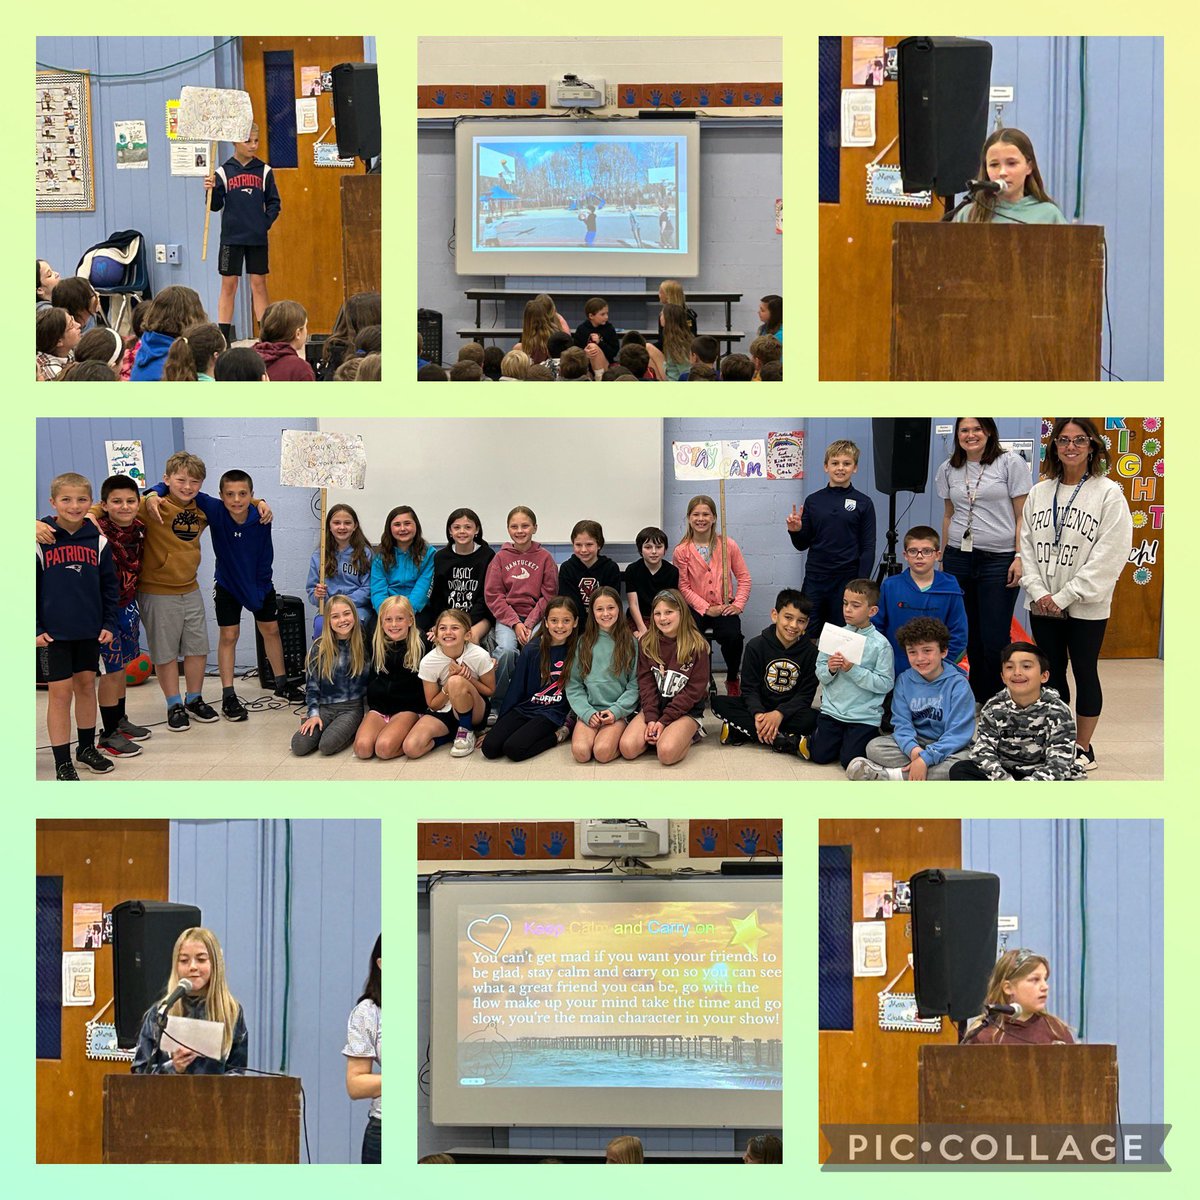 Happening now @ #beproudbedale…@MrsFlynnsClass8 is leading a student-led assembly focusing on expected & unexpected behaviors. Using poems & student created videos, they’re sharing an important message about positivity & responsibility. #medfieldcorevalues #kidsdeserveit